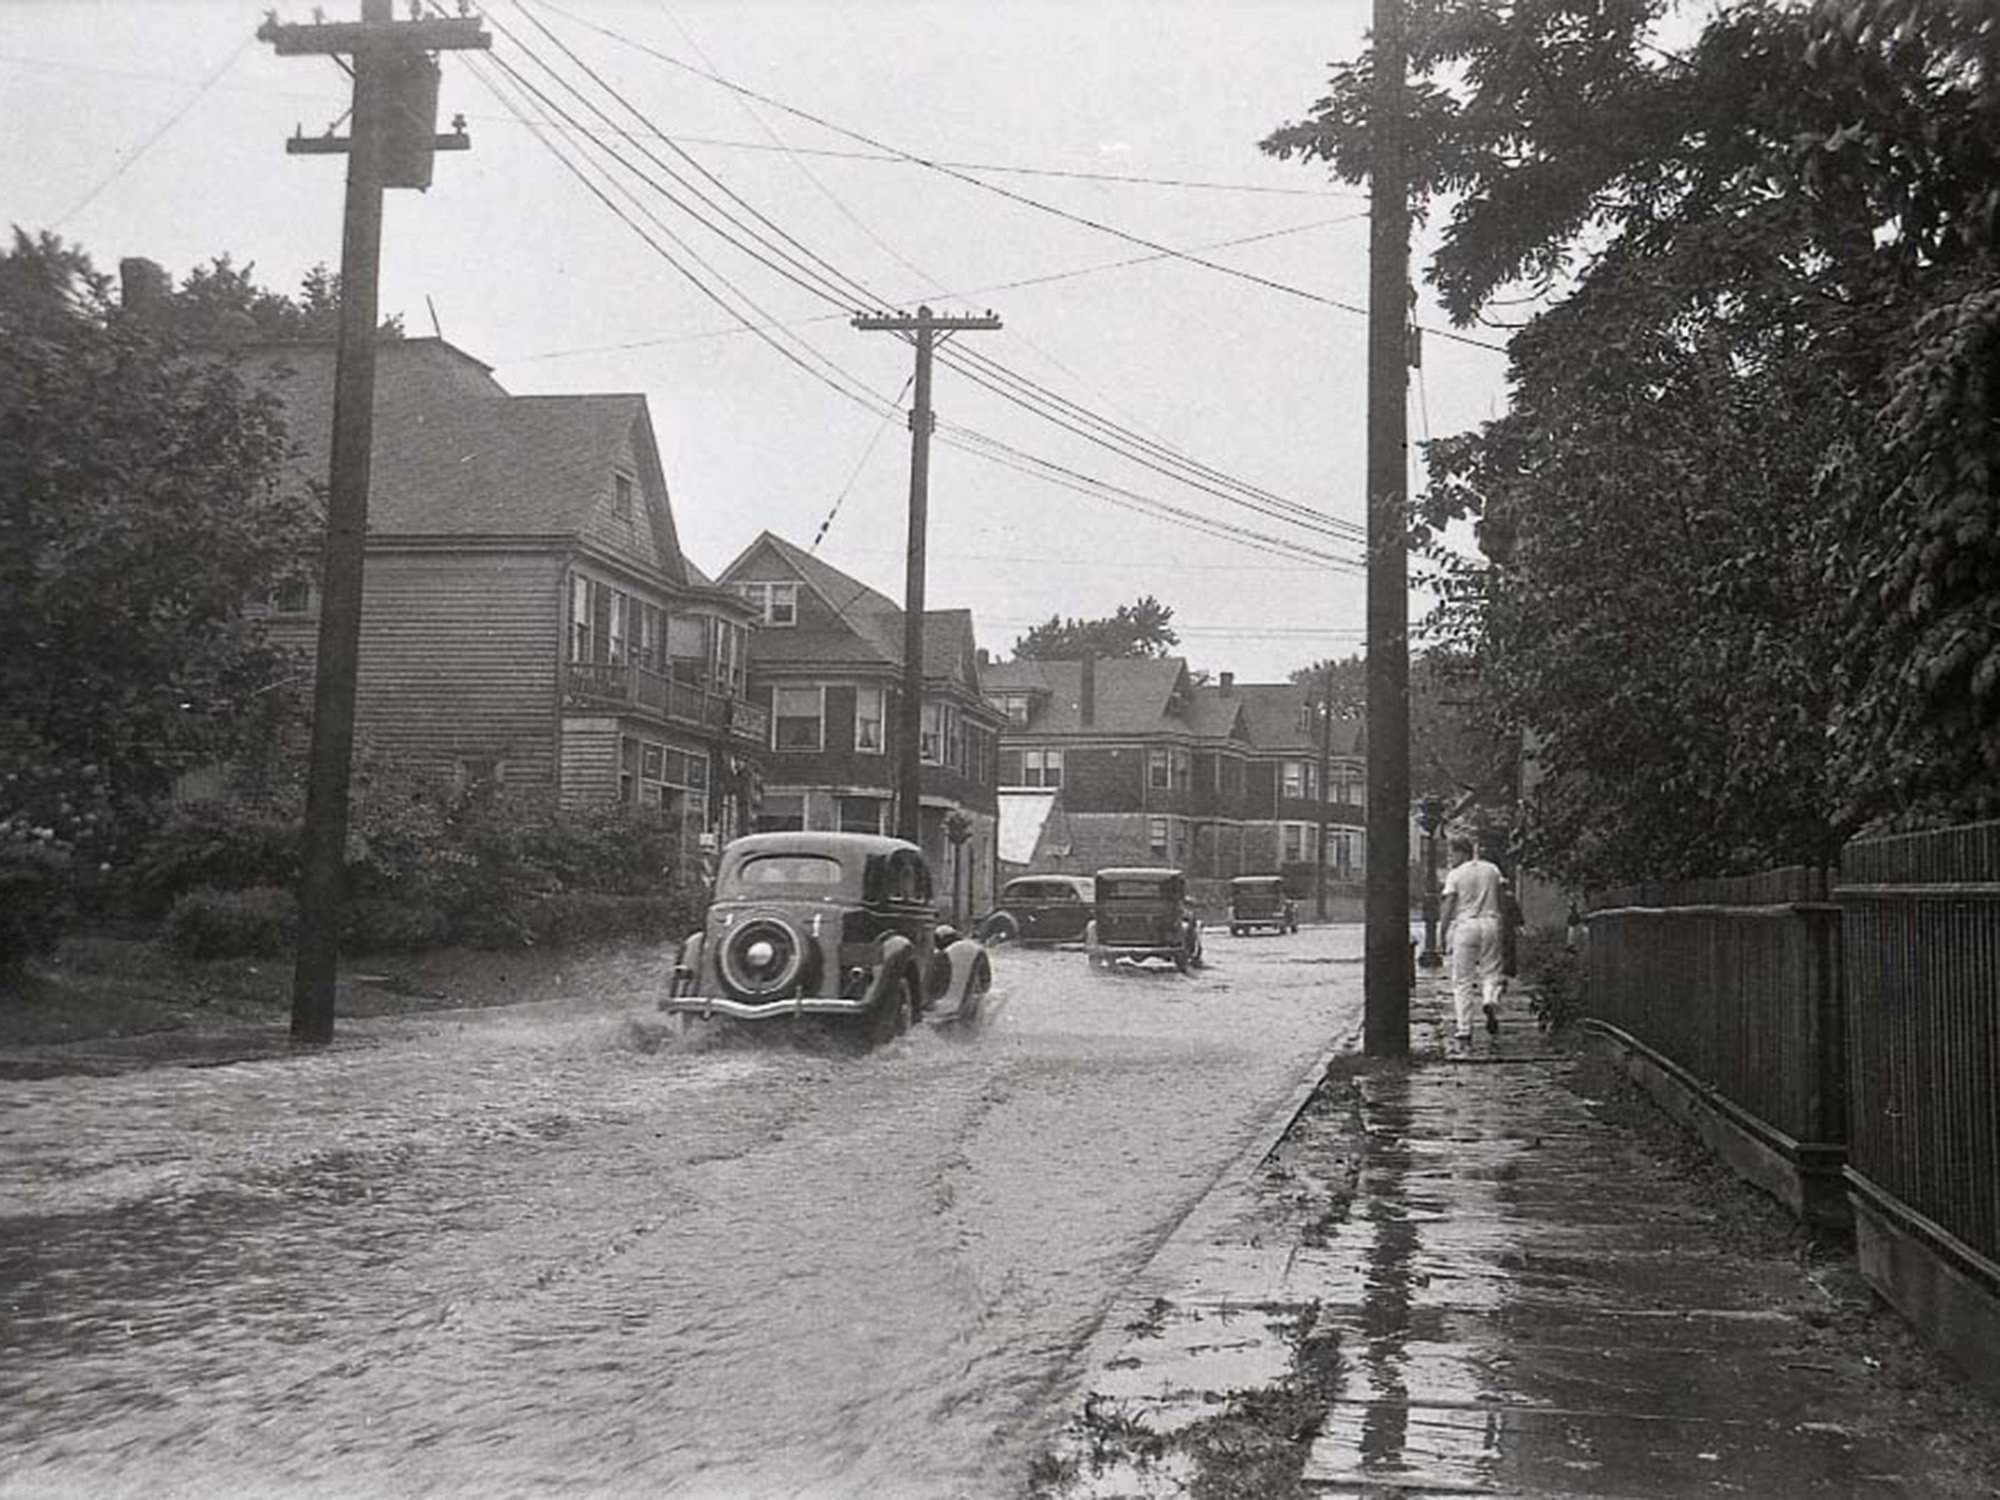 Vintage cars shown driving through a flooded street